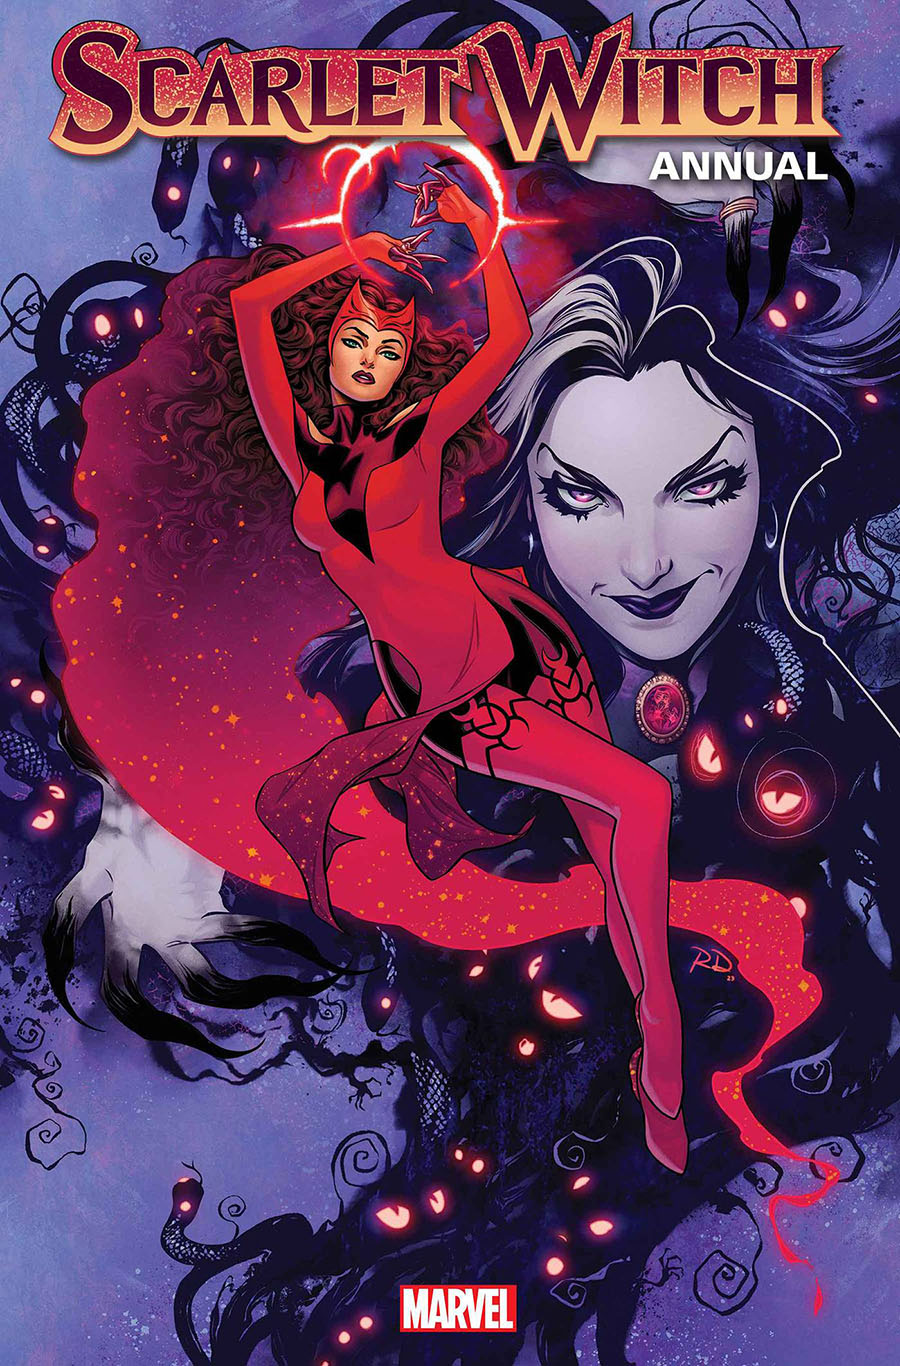 Scarlet Witch Vol 3 Annual #1 Poster